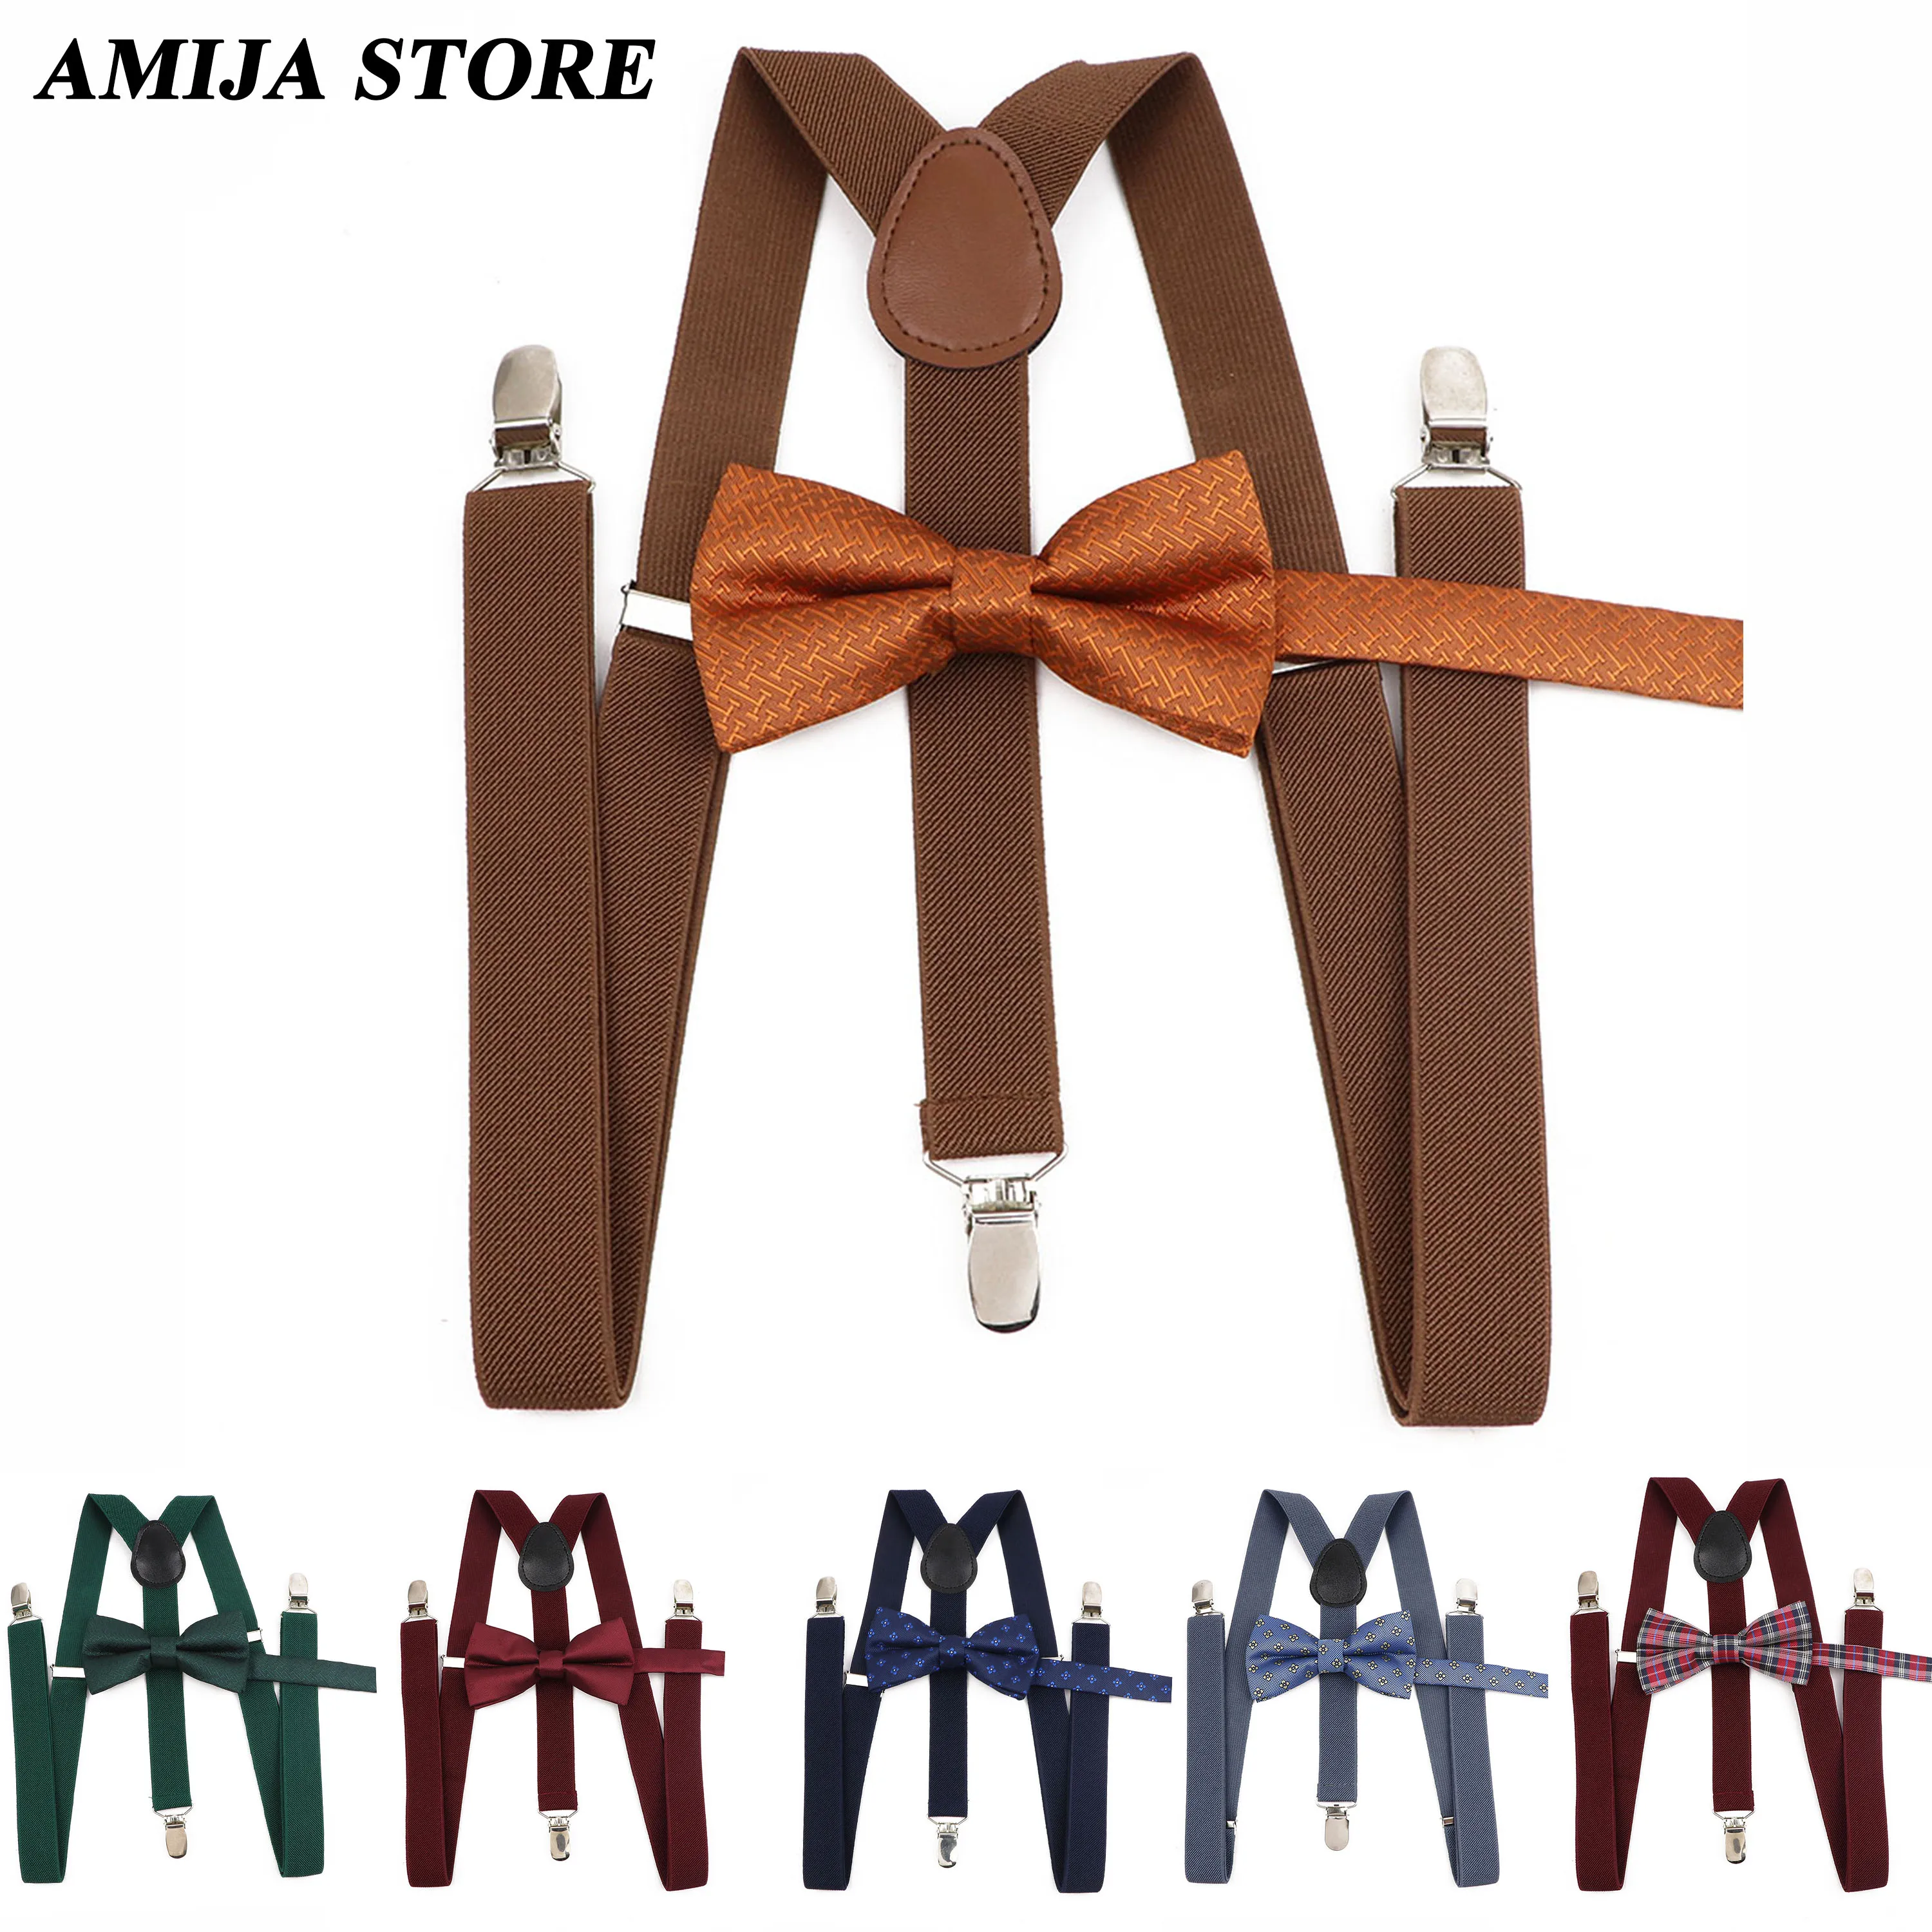 

Fashion Unisex Brown Plaid Striped Suspender Set Braces With Bowtie Clip-on Elastic Y-back Mens Straps Butterfly Party Meeting W